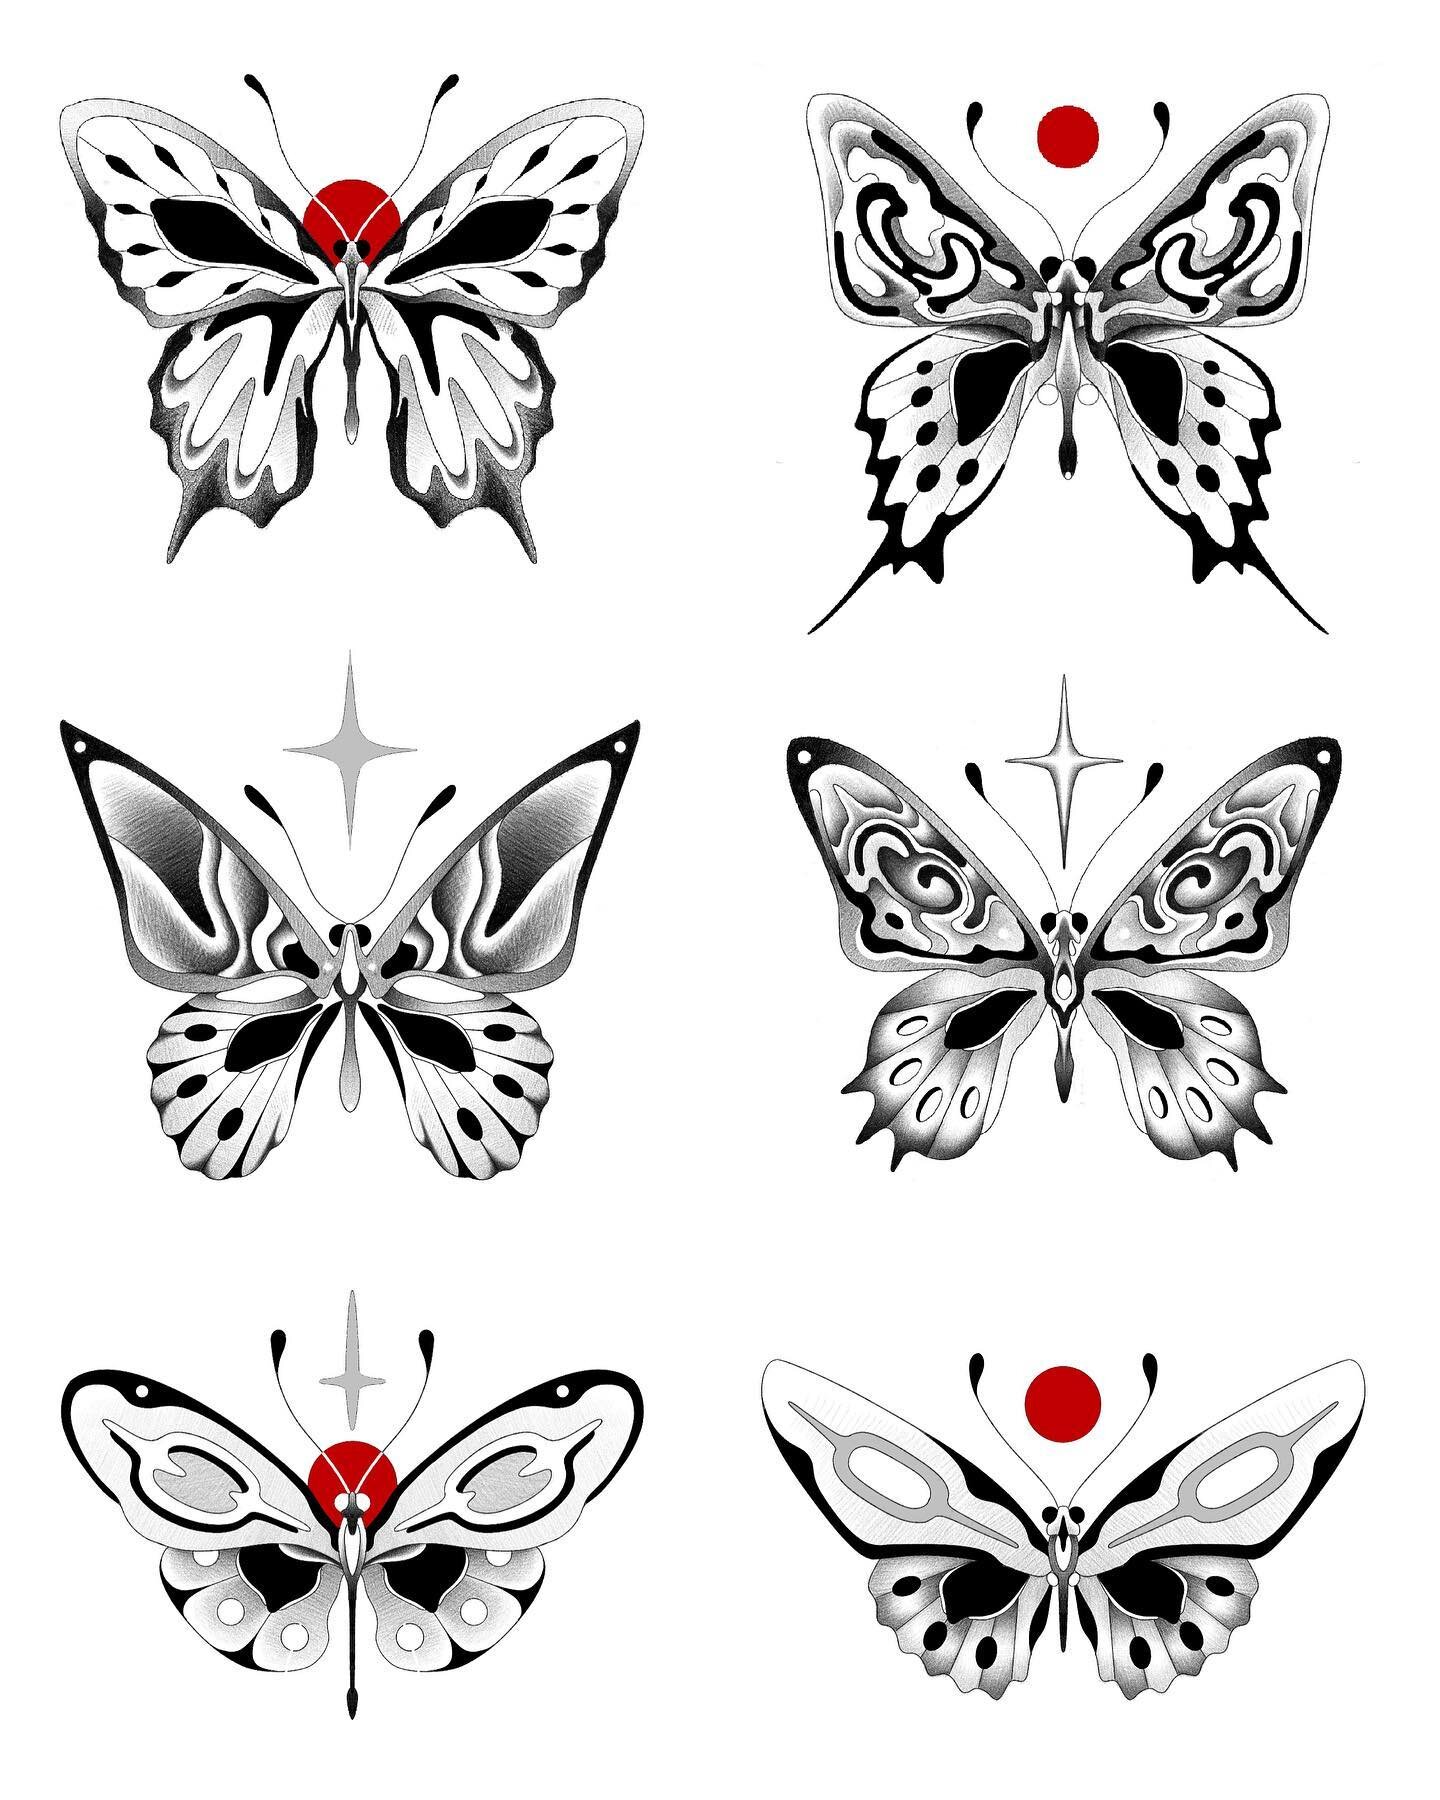 ATTENTION ATTENTION‼️🫶🏻
For my clients who wants SMALLER🦋 or has limited space to fit my usual ones, here's your chance to GET THEM, SMALL‼️

SIZE: 2-3 inches
This only applies to this flash sheet‼️

Dm if interested, thank you🫶🏻🫶🏻
(Do not cop